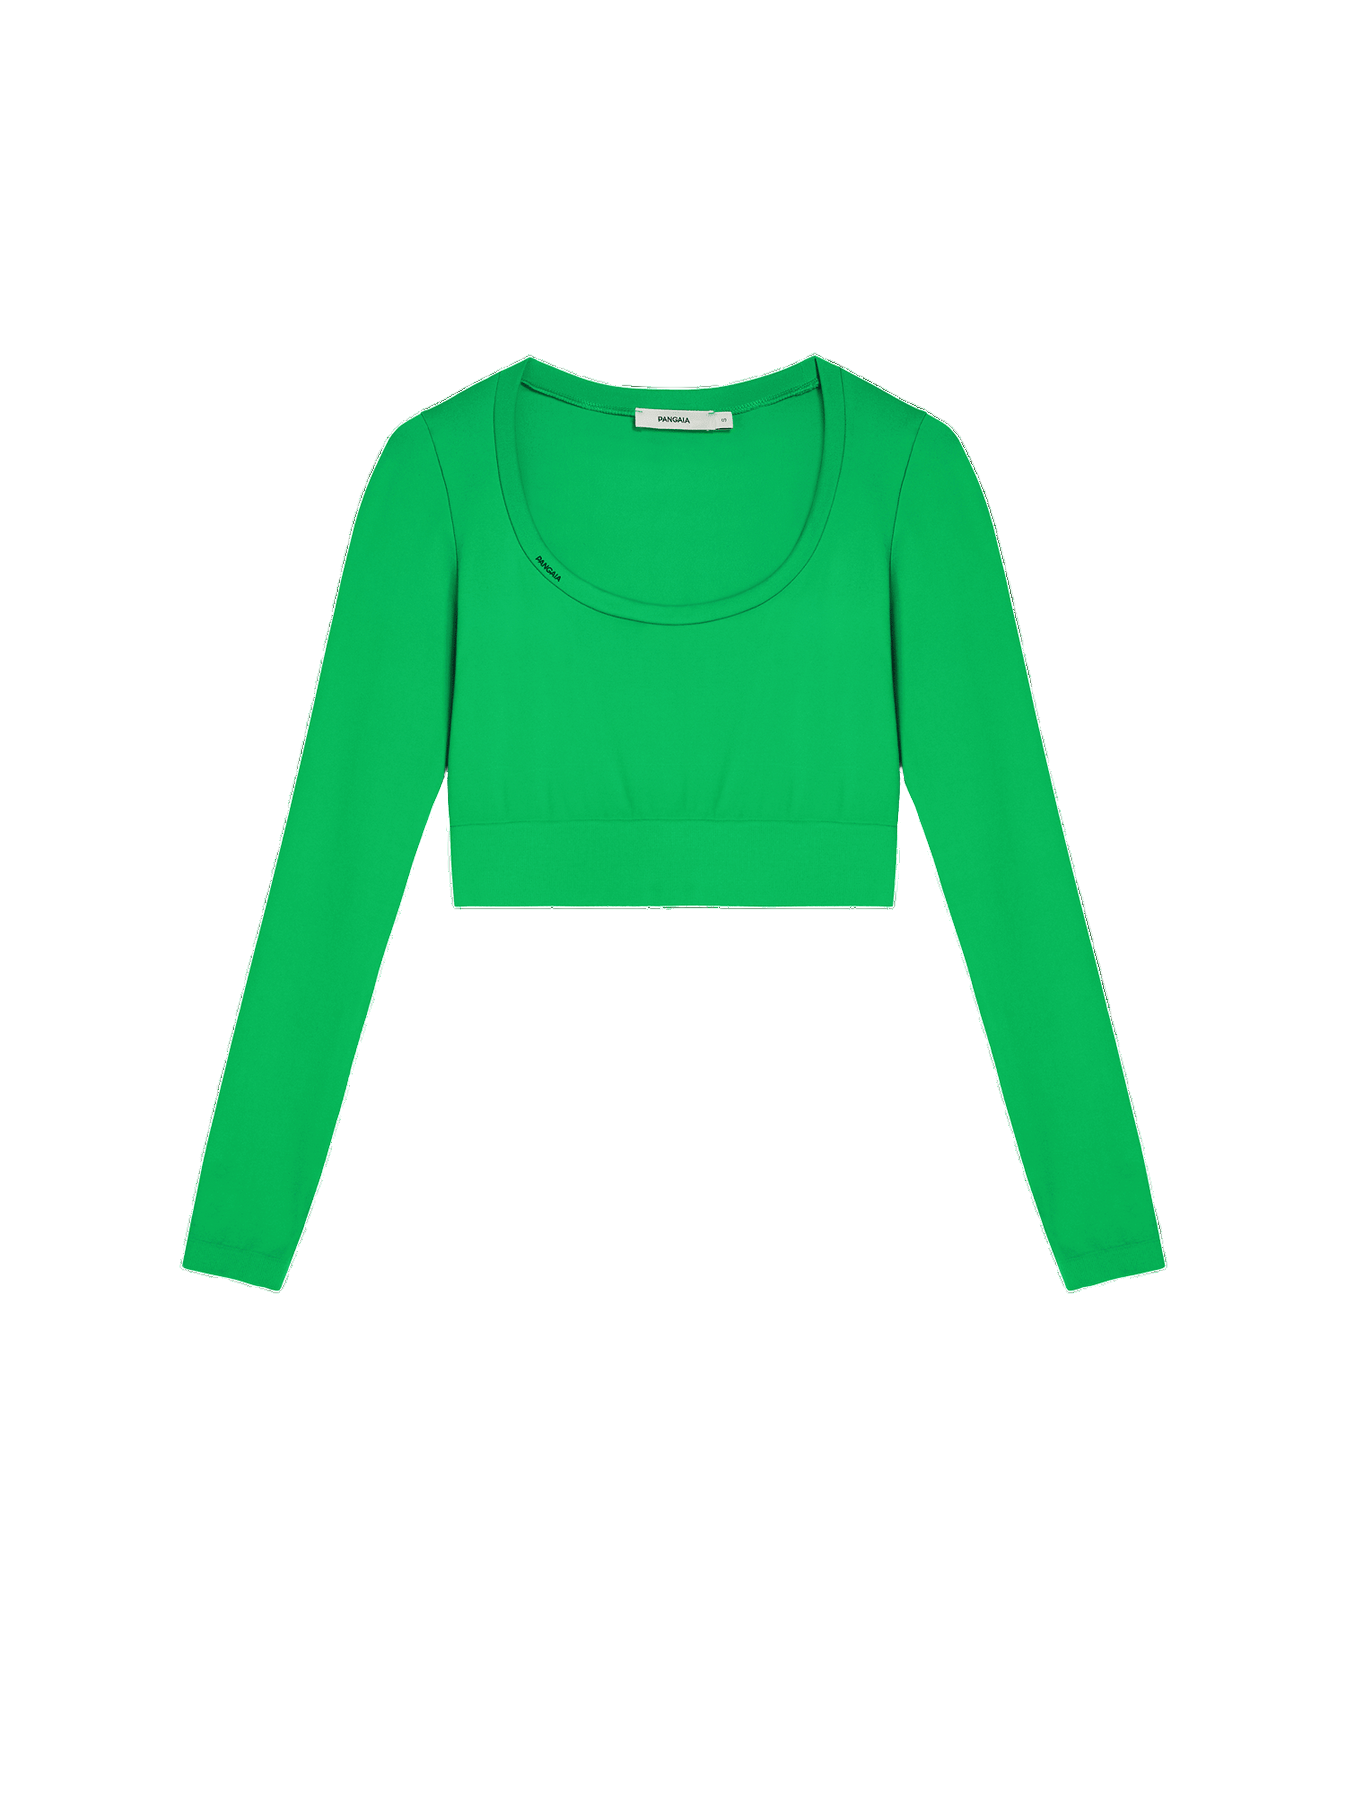 https://storage.googleapis.com/download/storage/v1/b/whering.appspot.com/o/marketplace_product_images%2Fpangaia-long-sleeved-top-green-pFRbPokdbf3DNuvVc5gzgG.png?generation=1690386981771551&alt=media